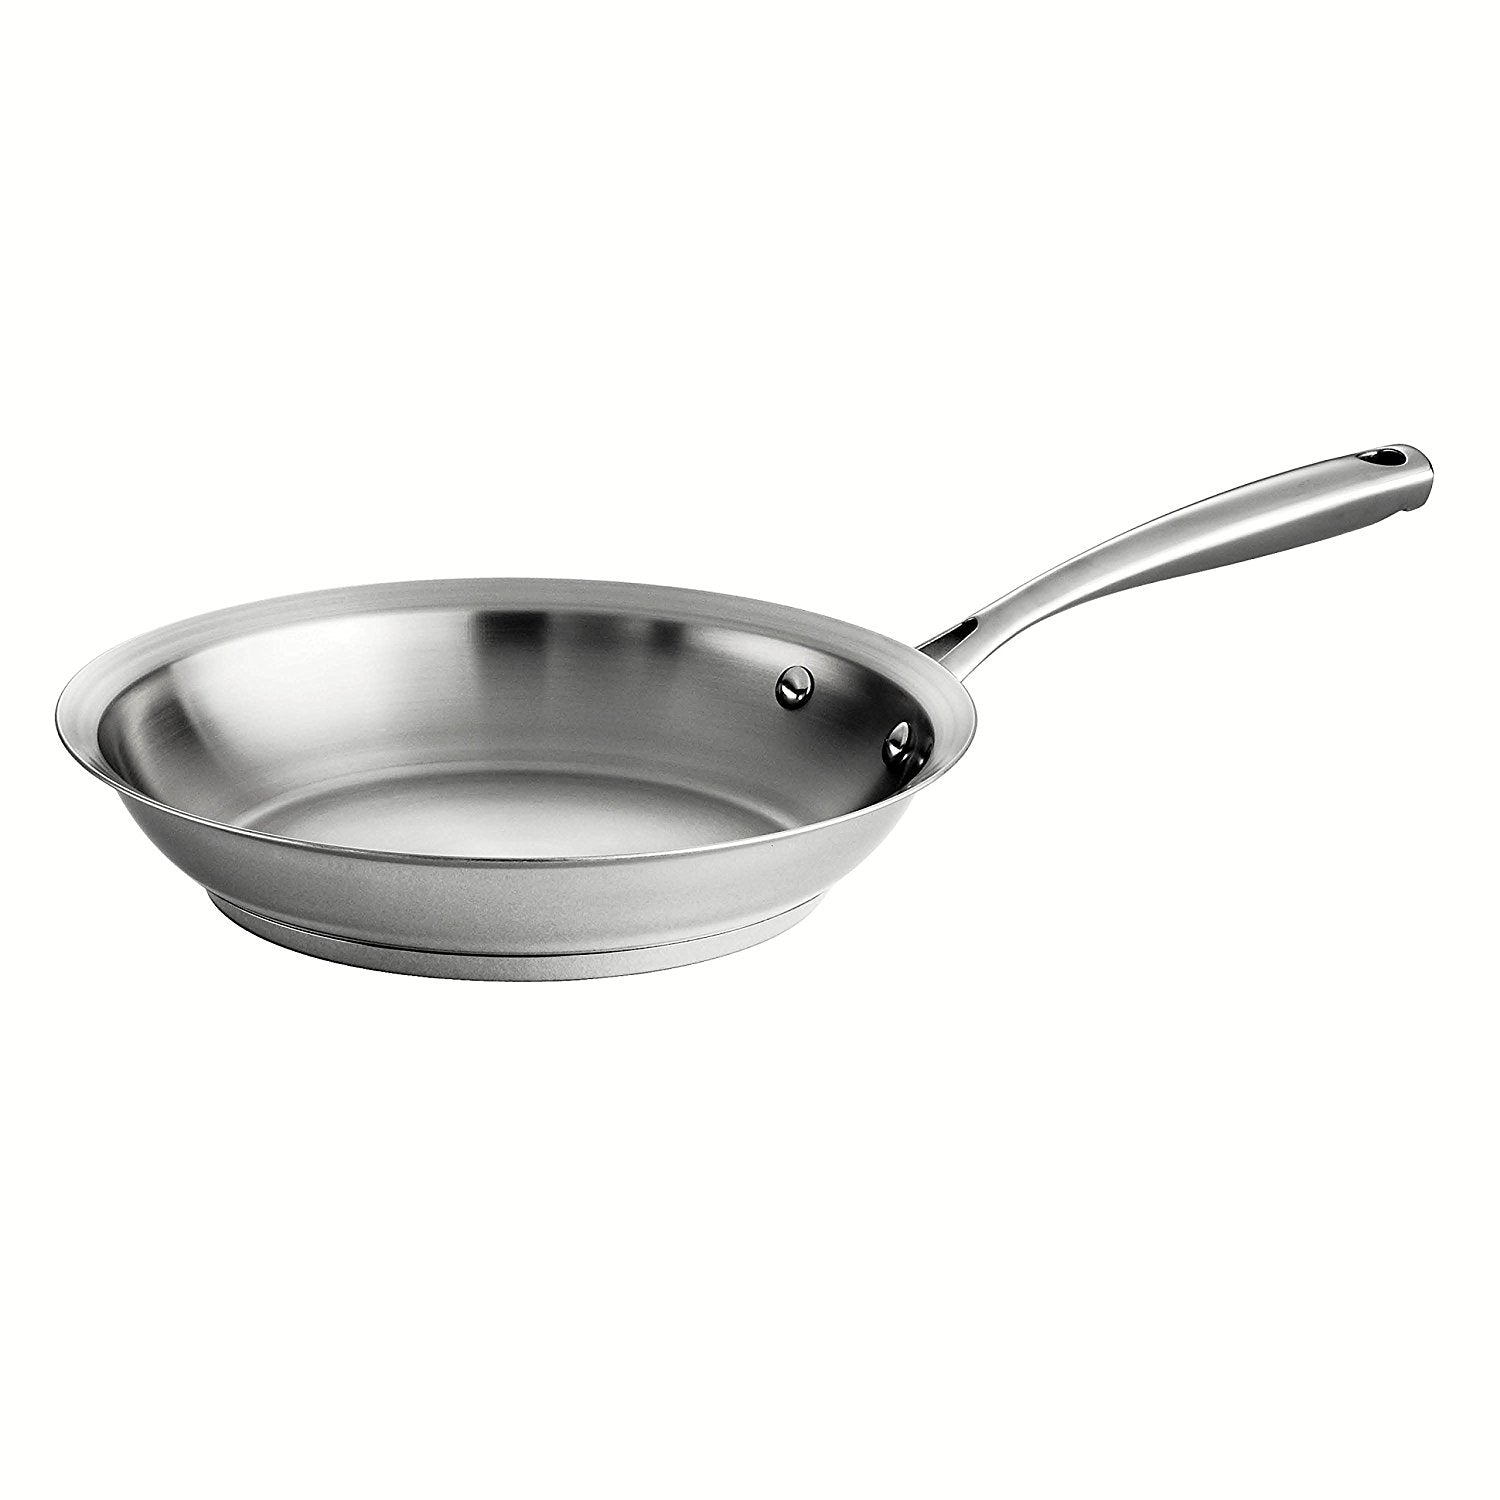 Tramontina 80101-021DS 12" Gourmet Prima 18/10 Tri-Ply Base Fry Pan, Stainless Steel - Induction Ready, Dishwasher Safe, Oven Safe FRYPAN